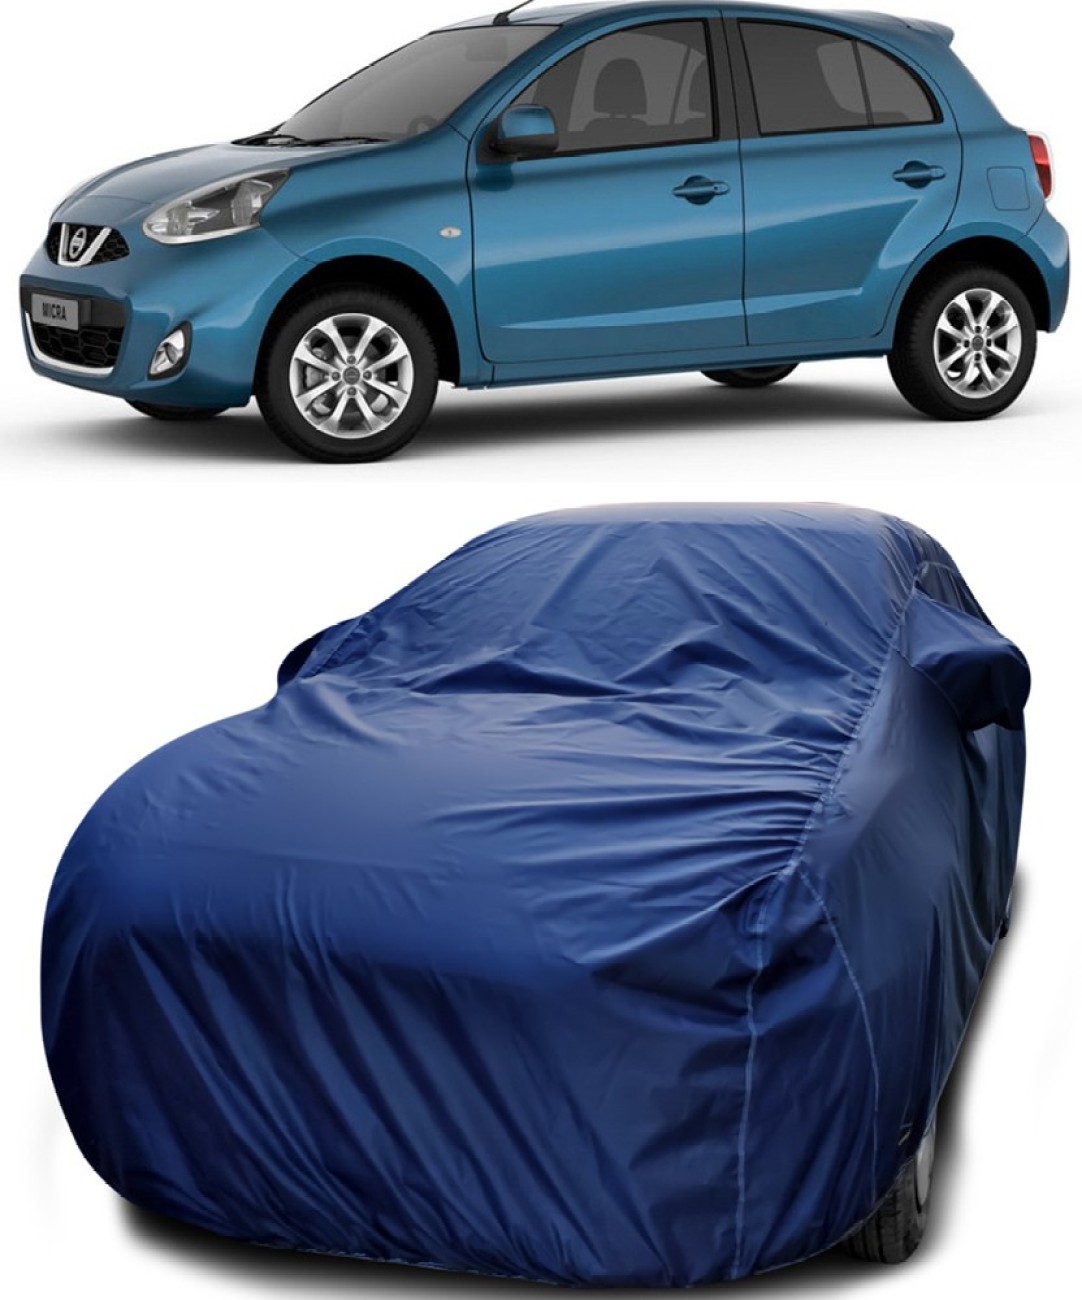 Dvis Car Cover For Nissan Micra (With Mirror Pockets) Price in